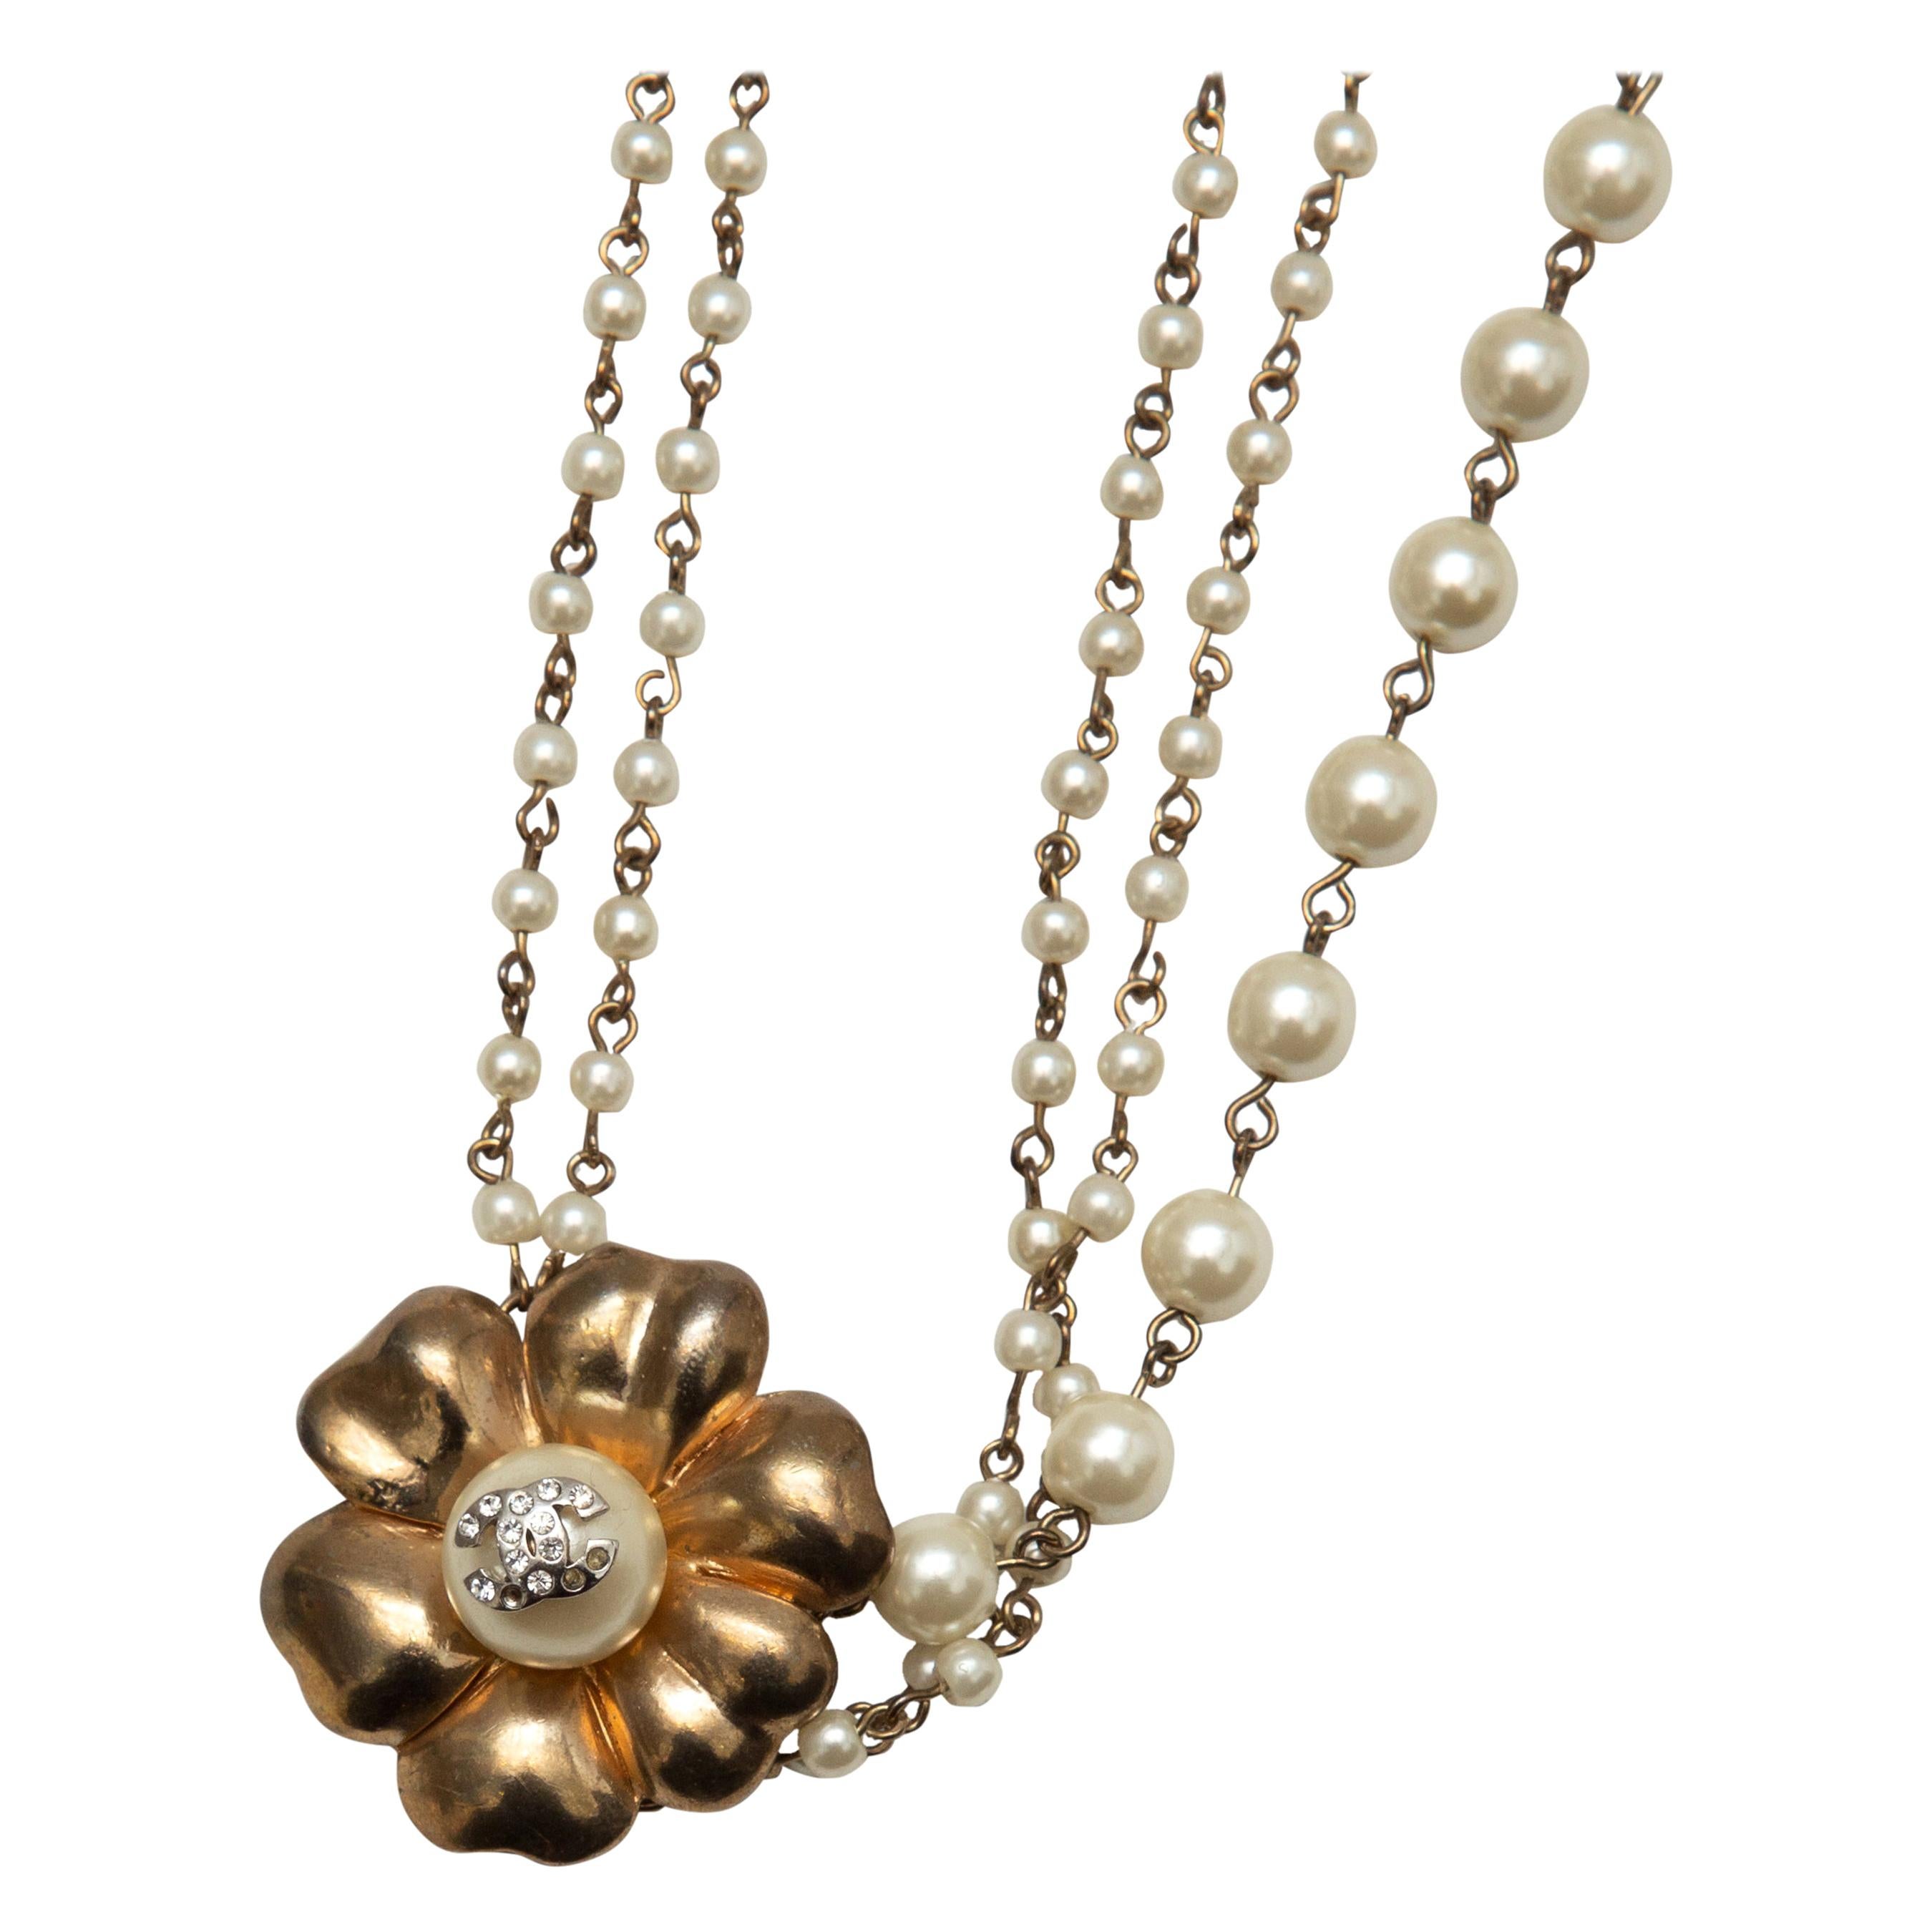  Chanel Gold Faux Pearl Flower Necklace